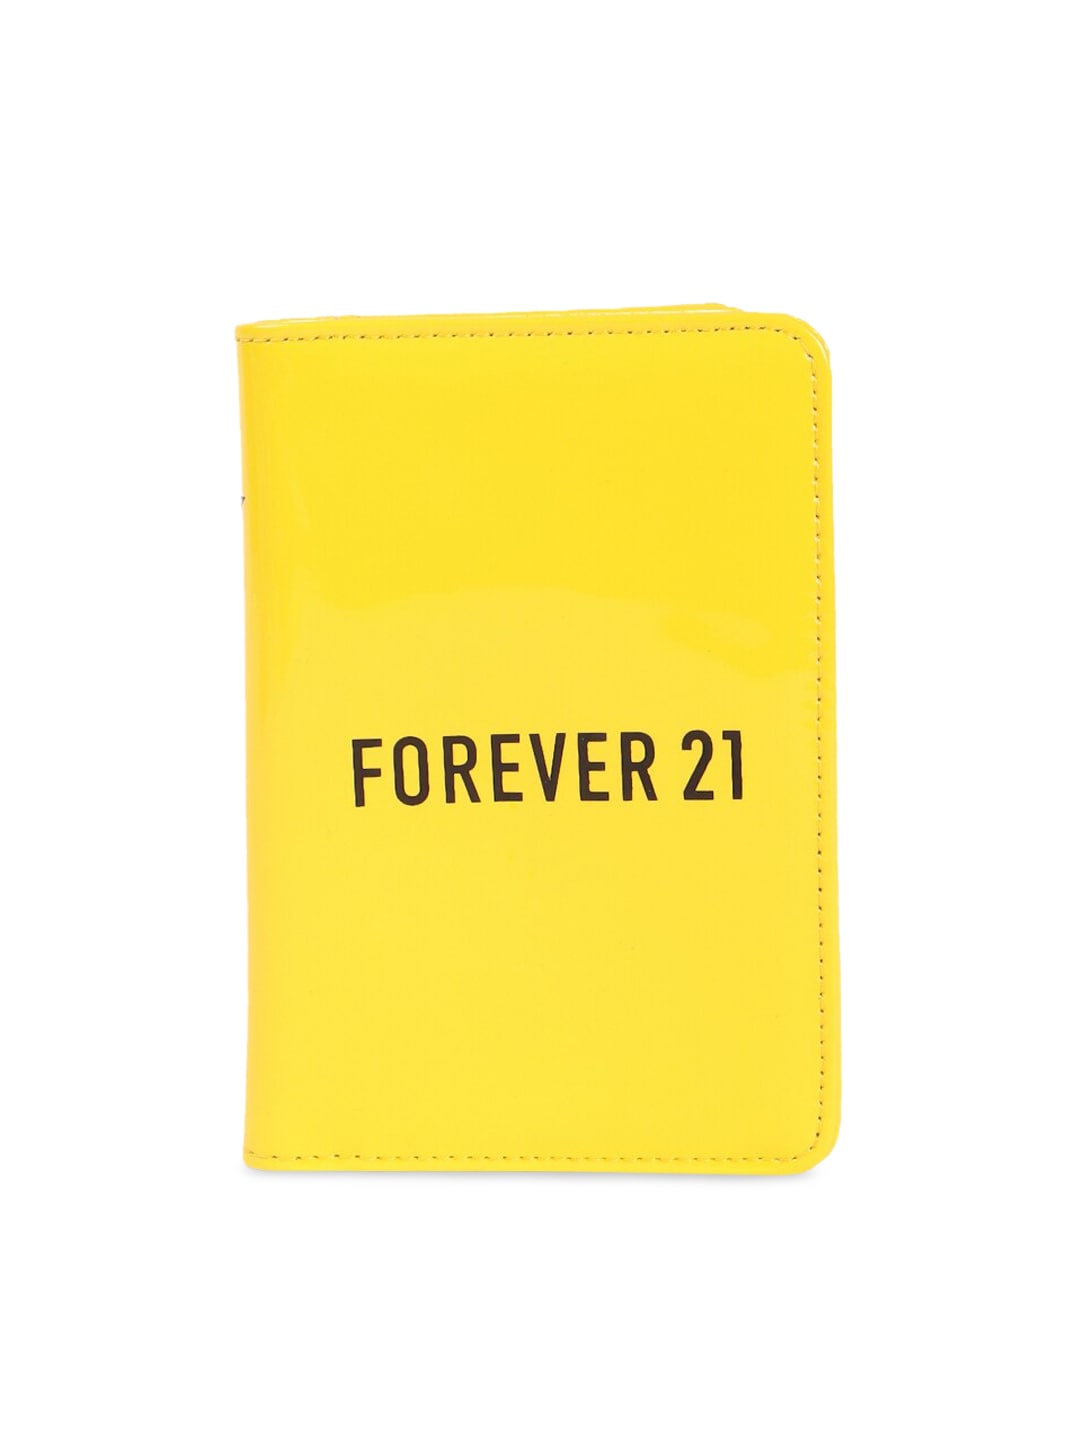 FOREVER 21 Women Yellow Printed Two Fold Wallet Price in India